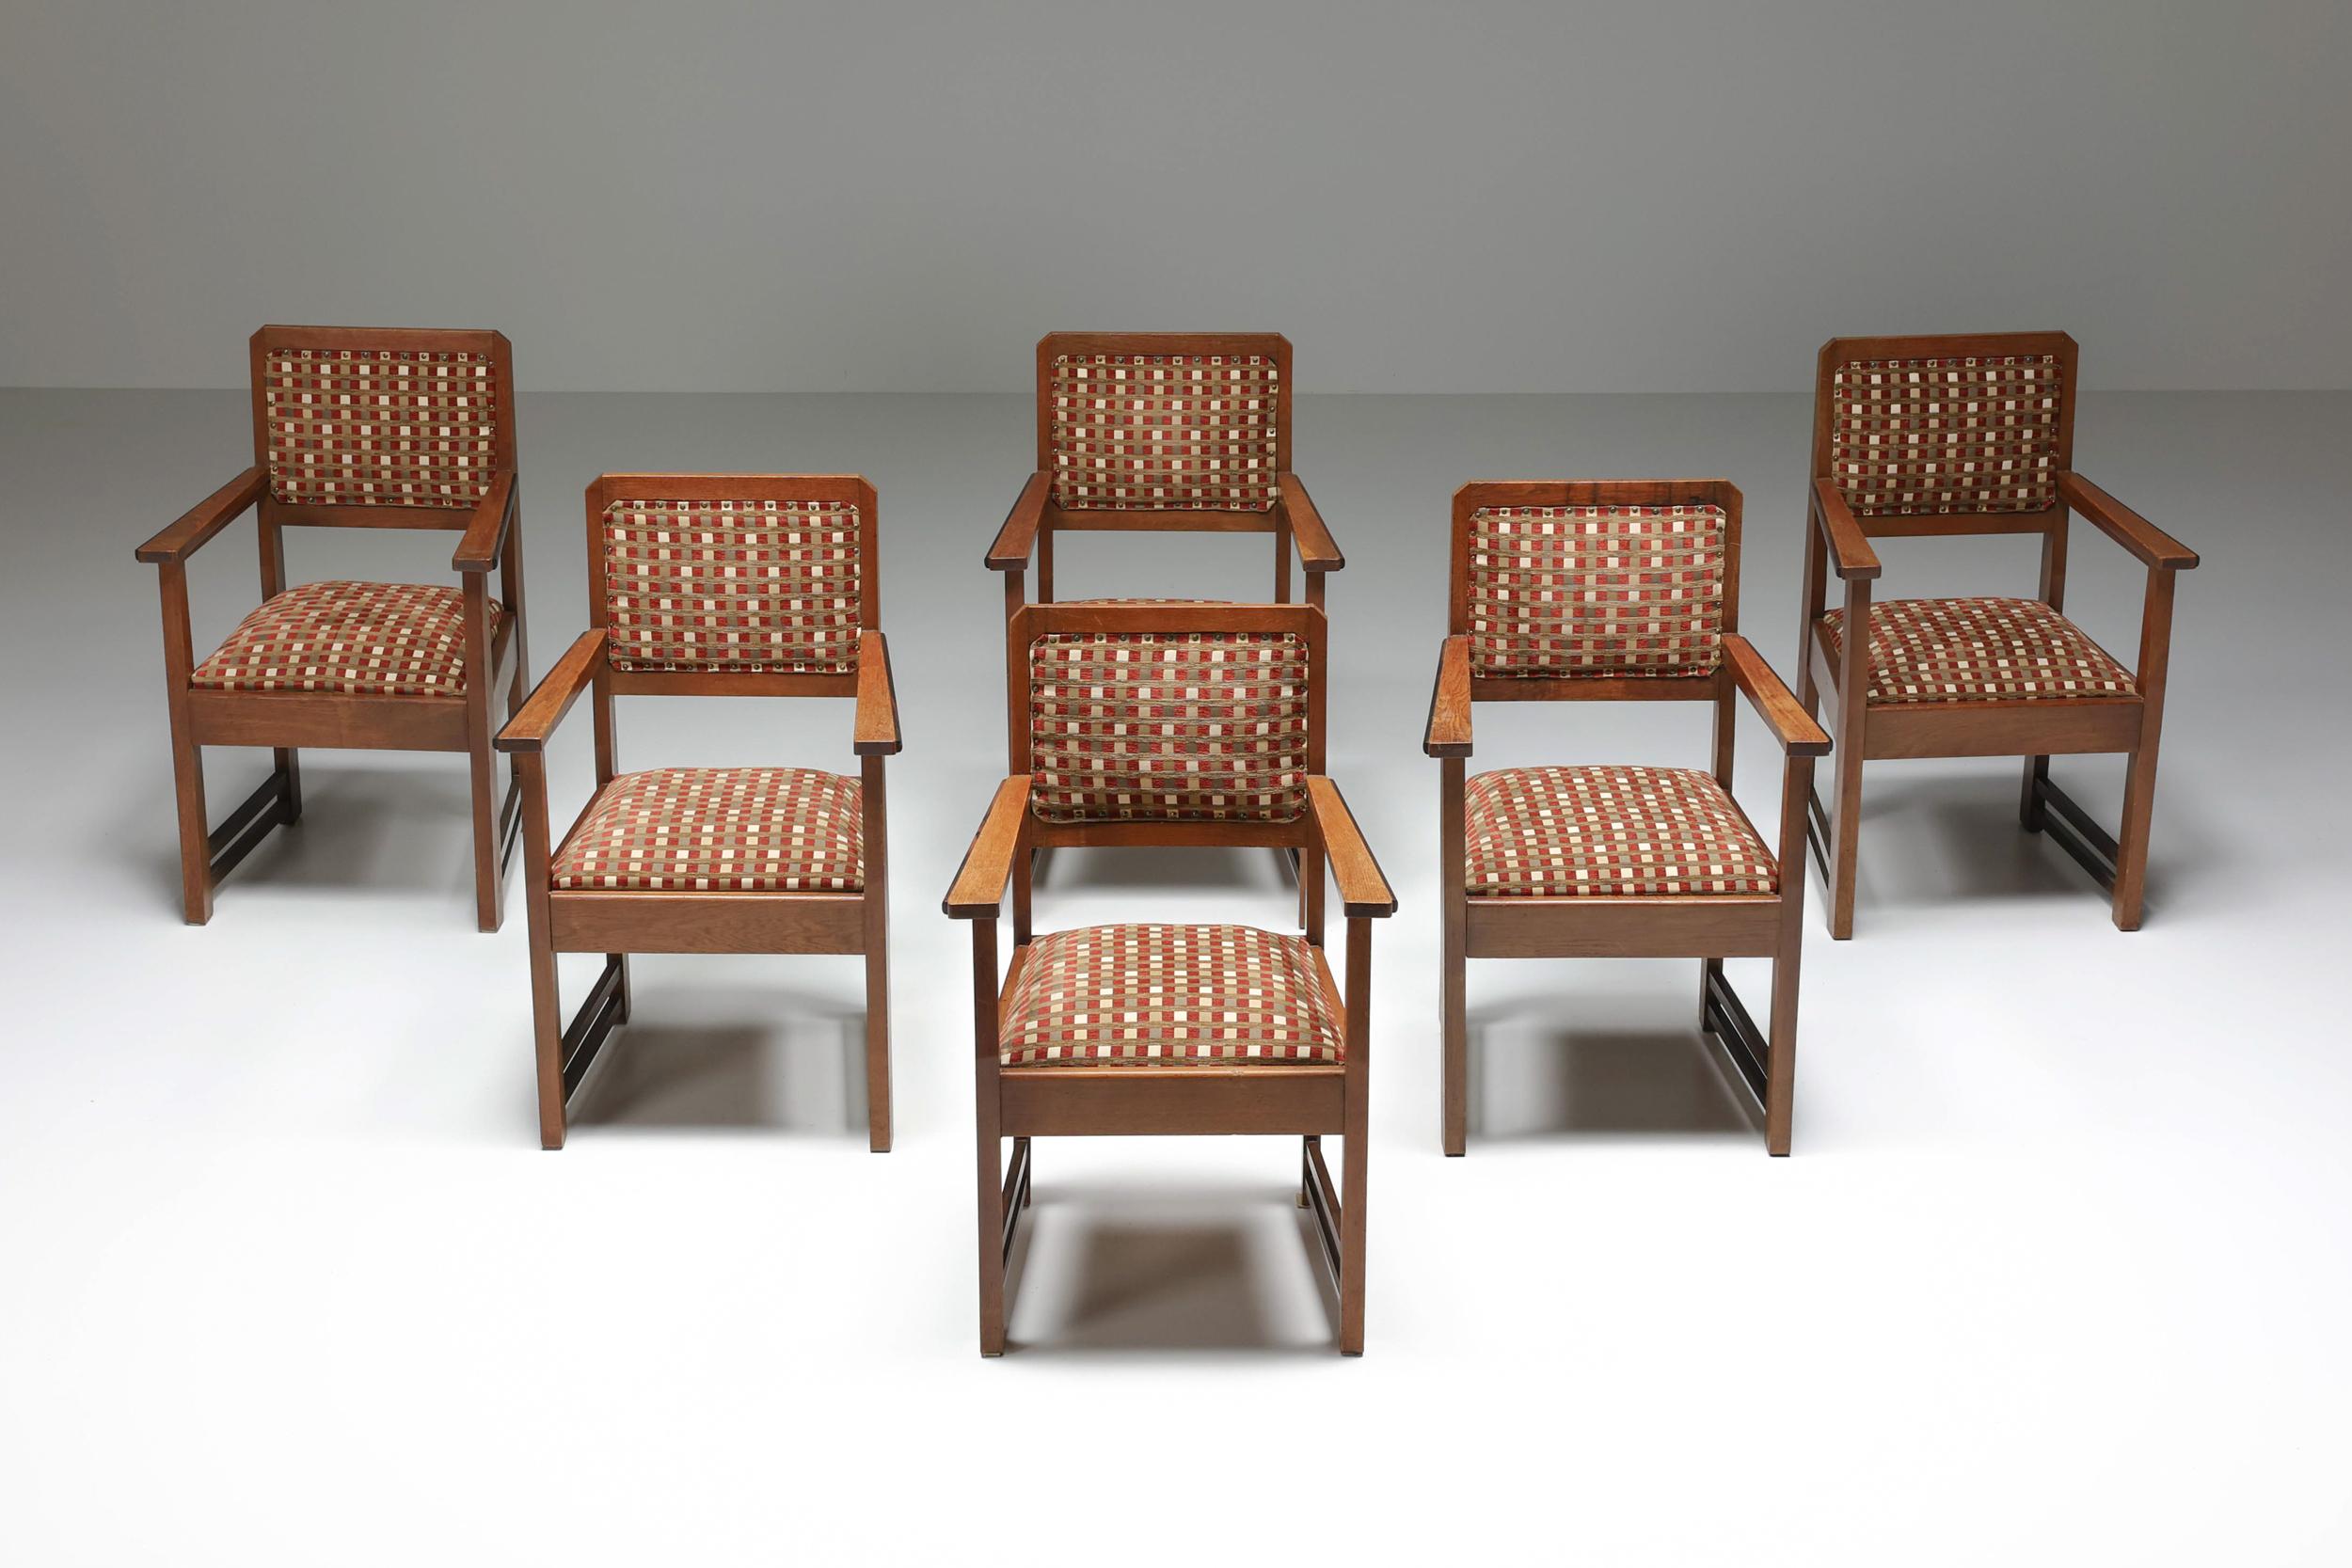 1940's, Dutch Modern, Lounge Chair, Amsterdamse school, Armchair, Art Deco, Expressionism, Jugendstil. 

Dutch modern set of six chairs of Amsterdamse school. The original upholstery creates an authentic quality. The Amsterdam School is famous for